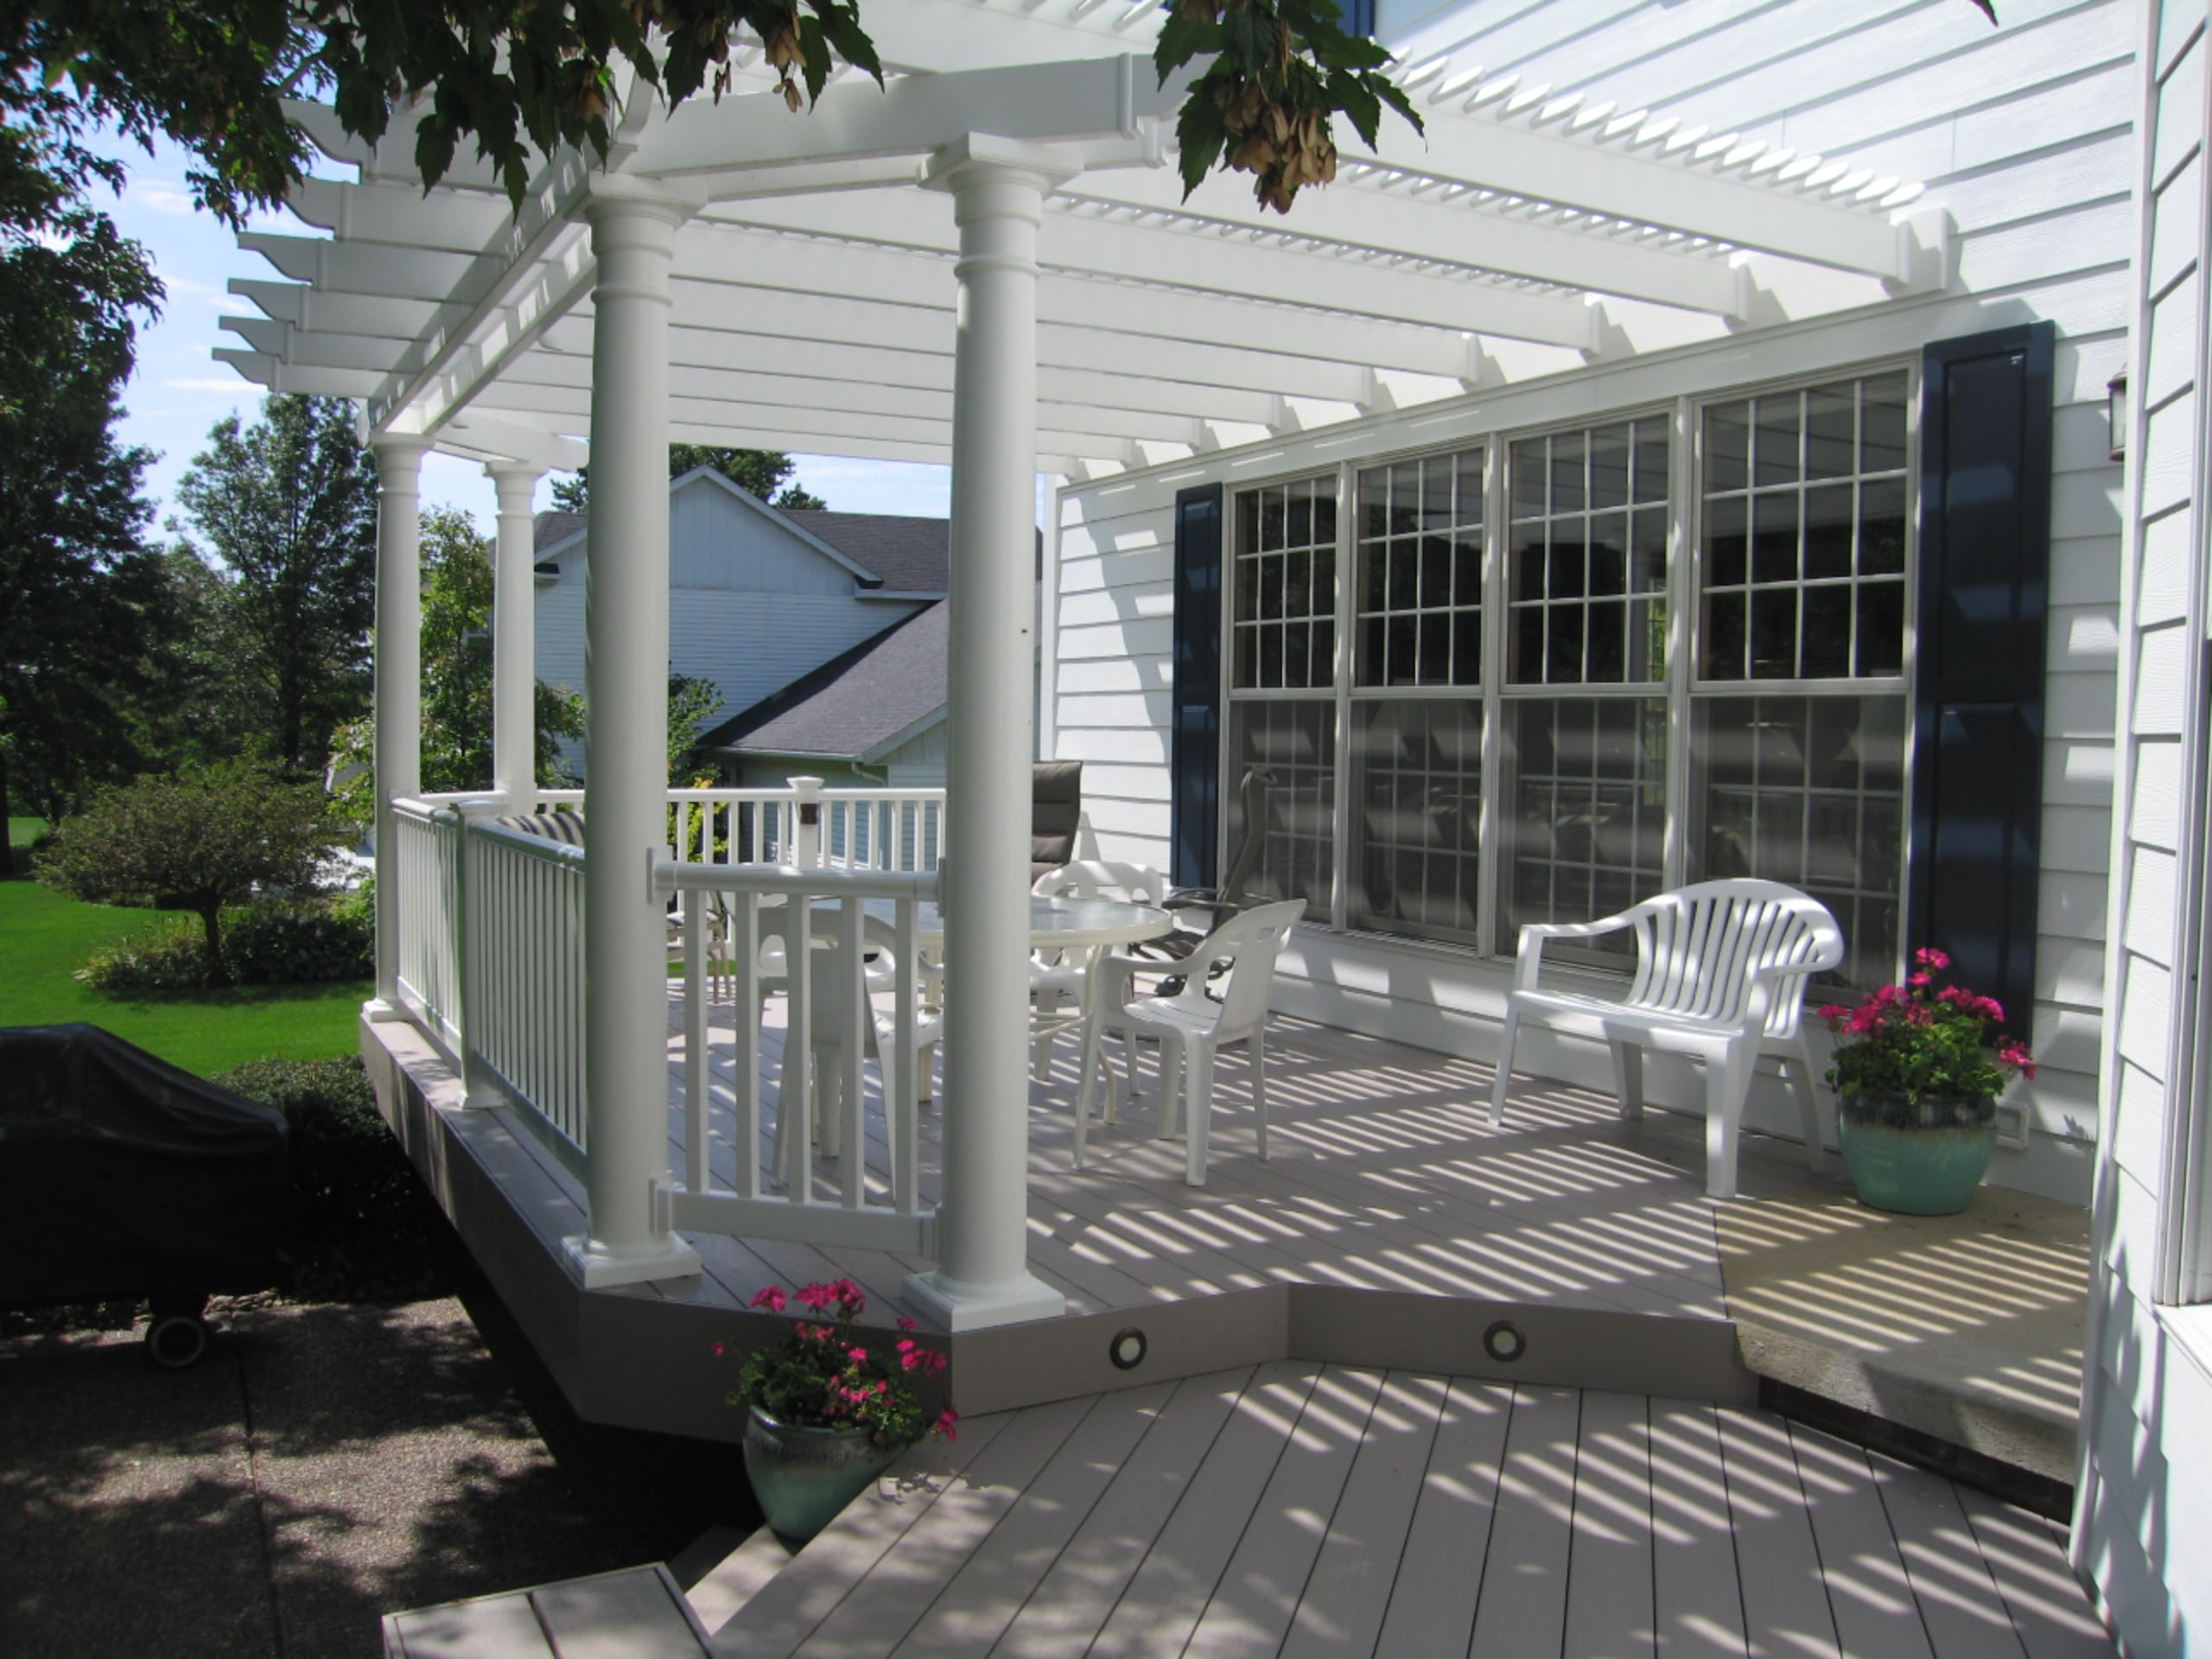 This white house has four large windows looking out to the deck area. There is a white pergola connected to the deck and the house, covering white deck furniture and pink flowers in blue flower pots.